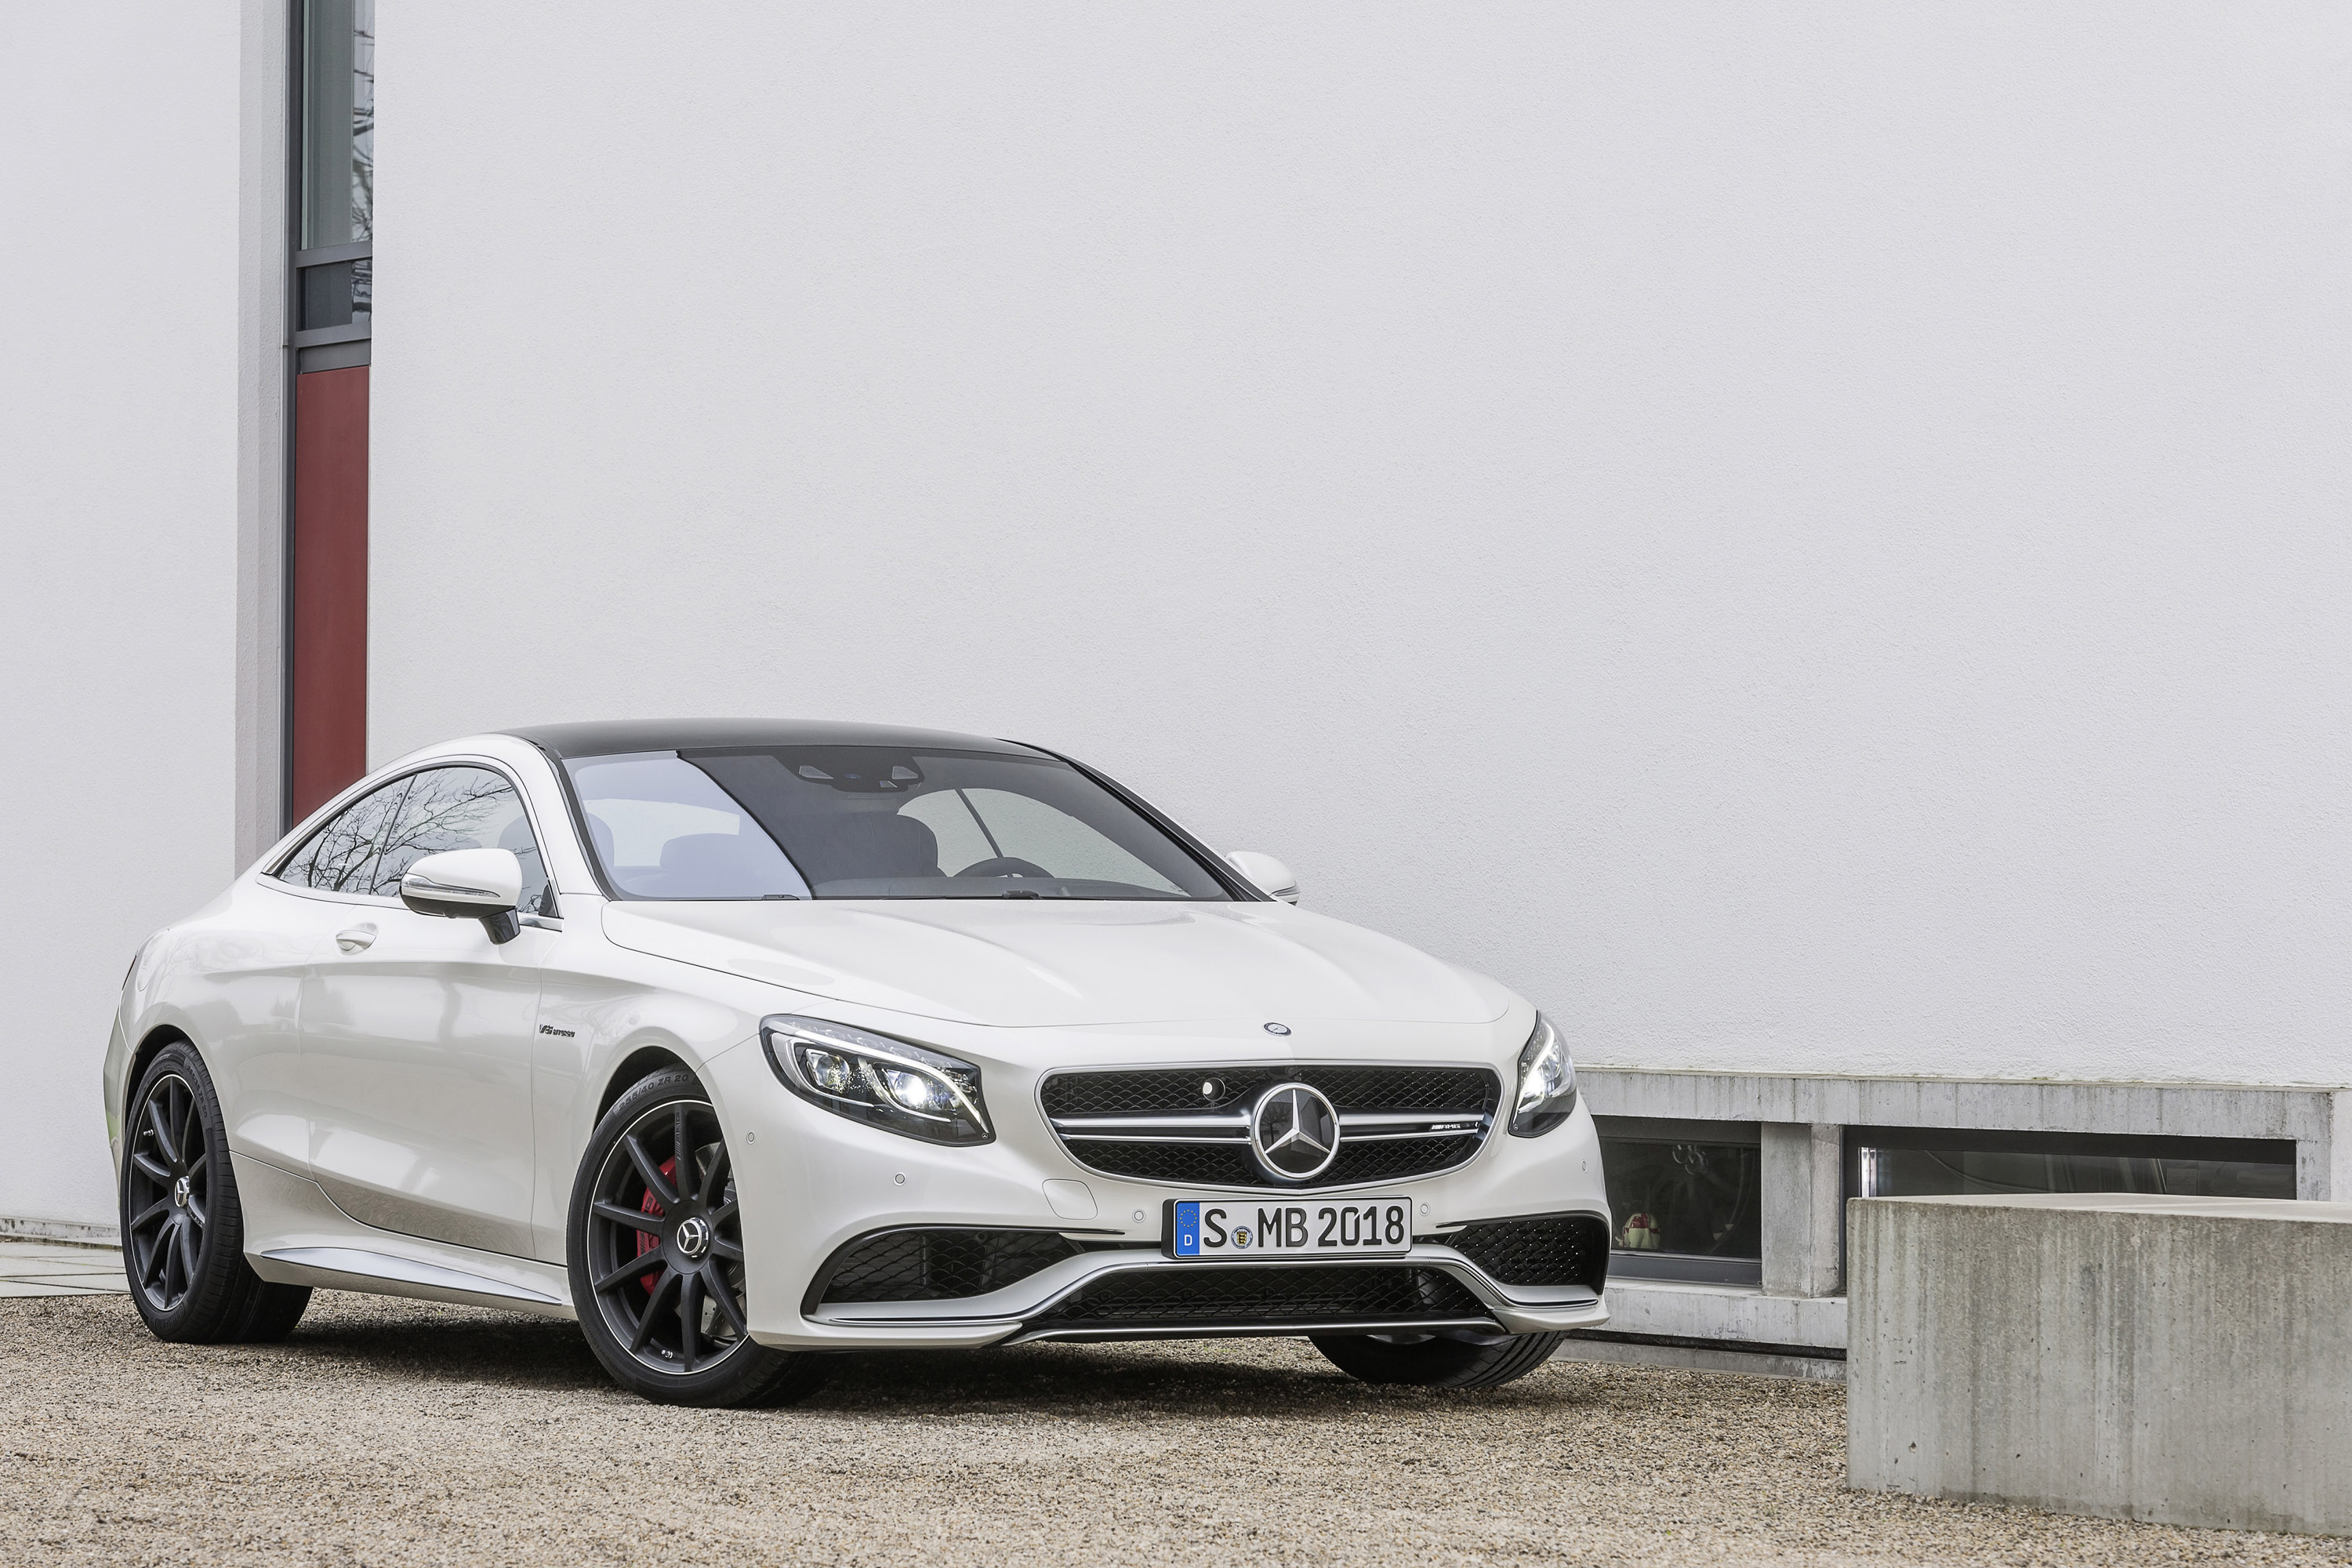 Mercedes-Benz S63 AMG Coupe photo #1